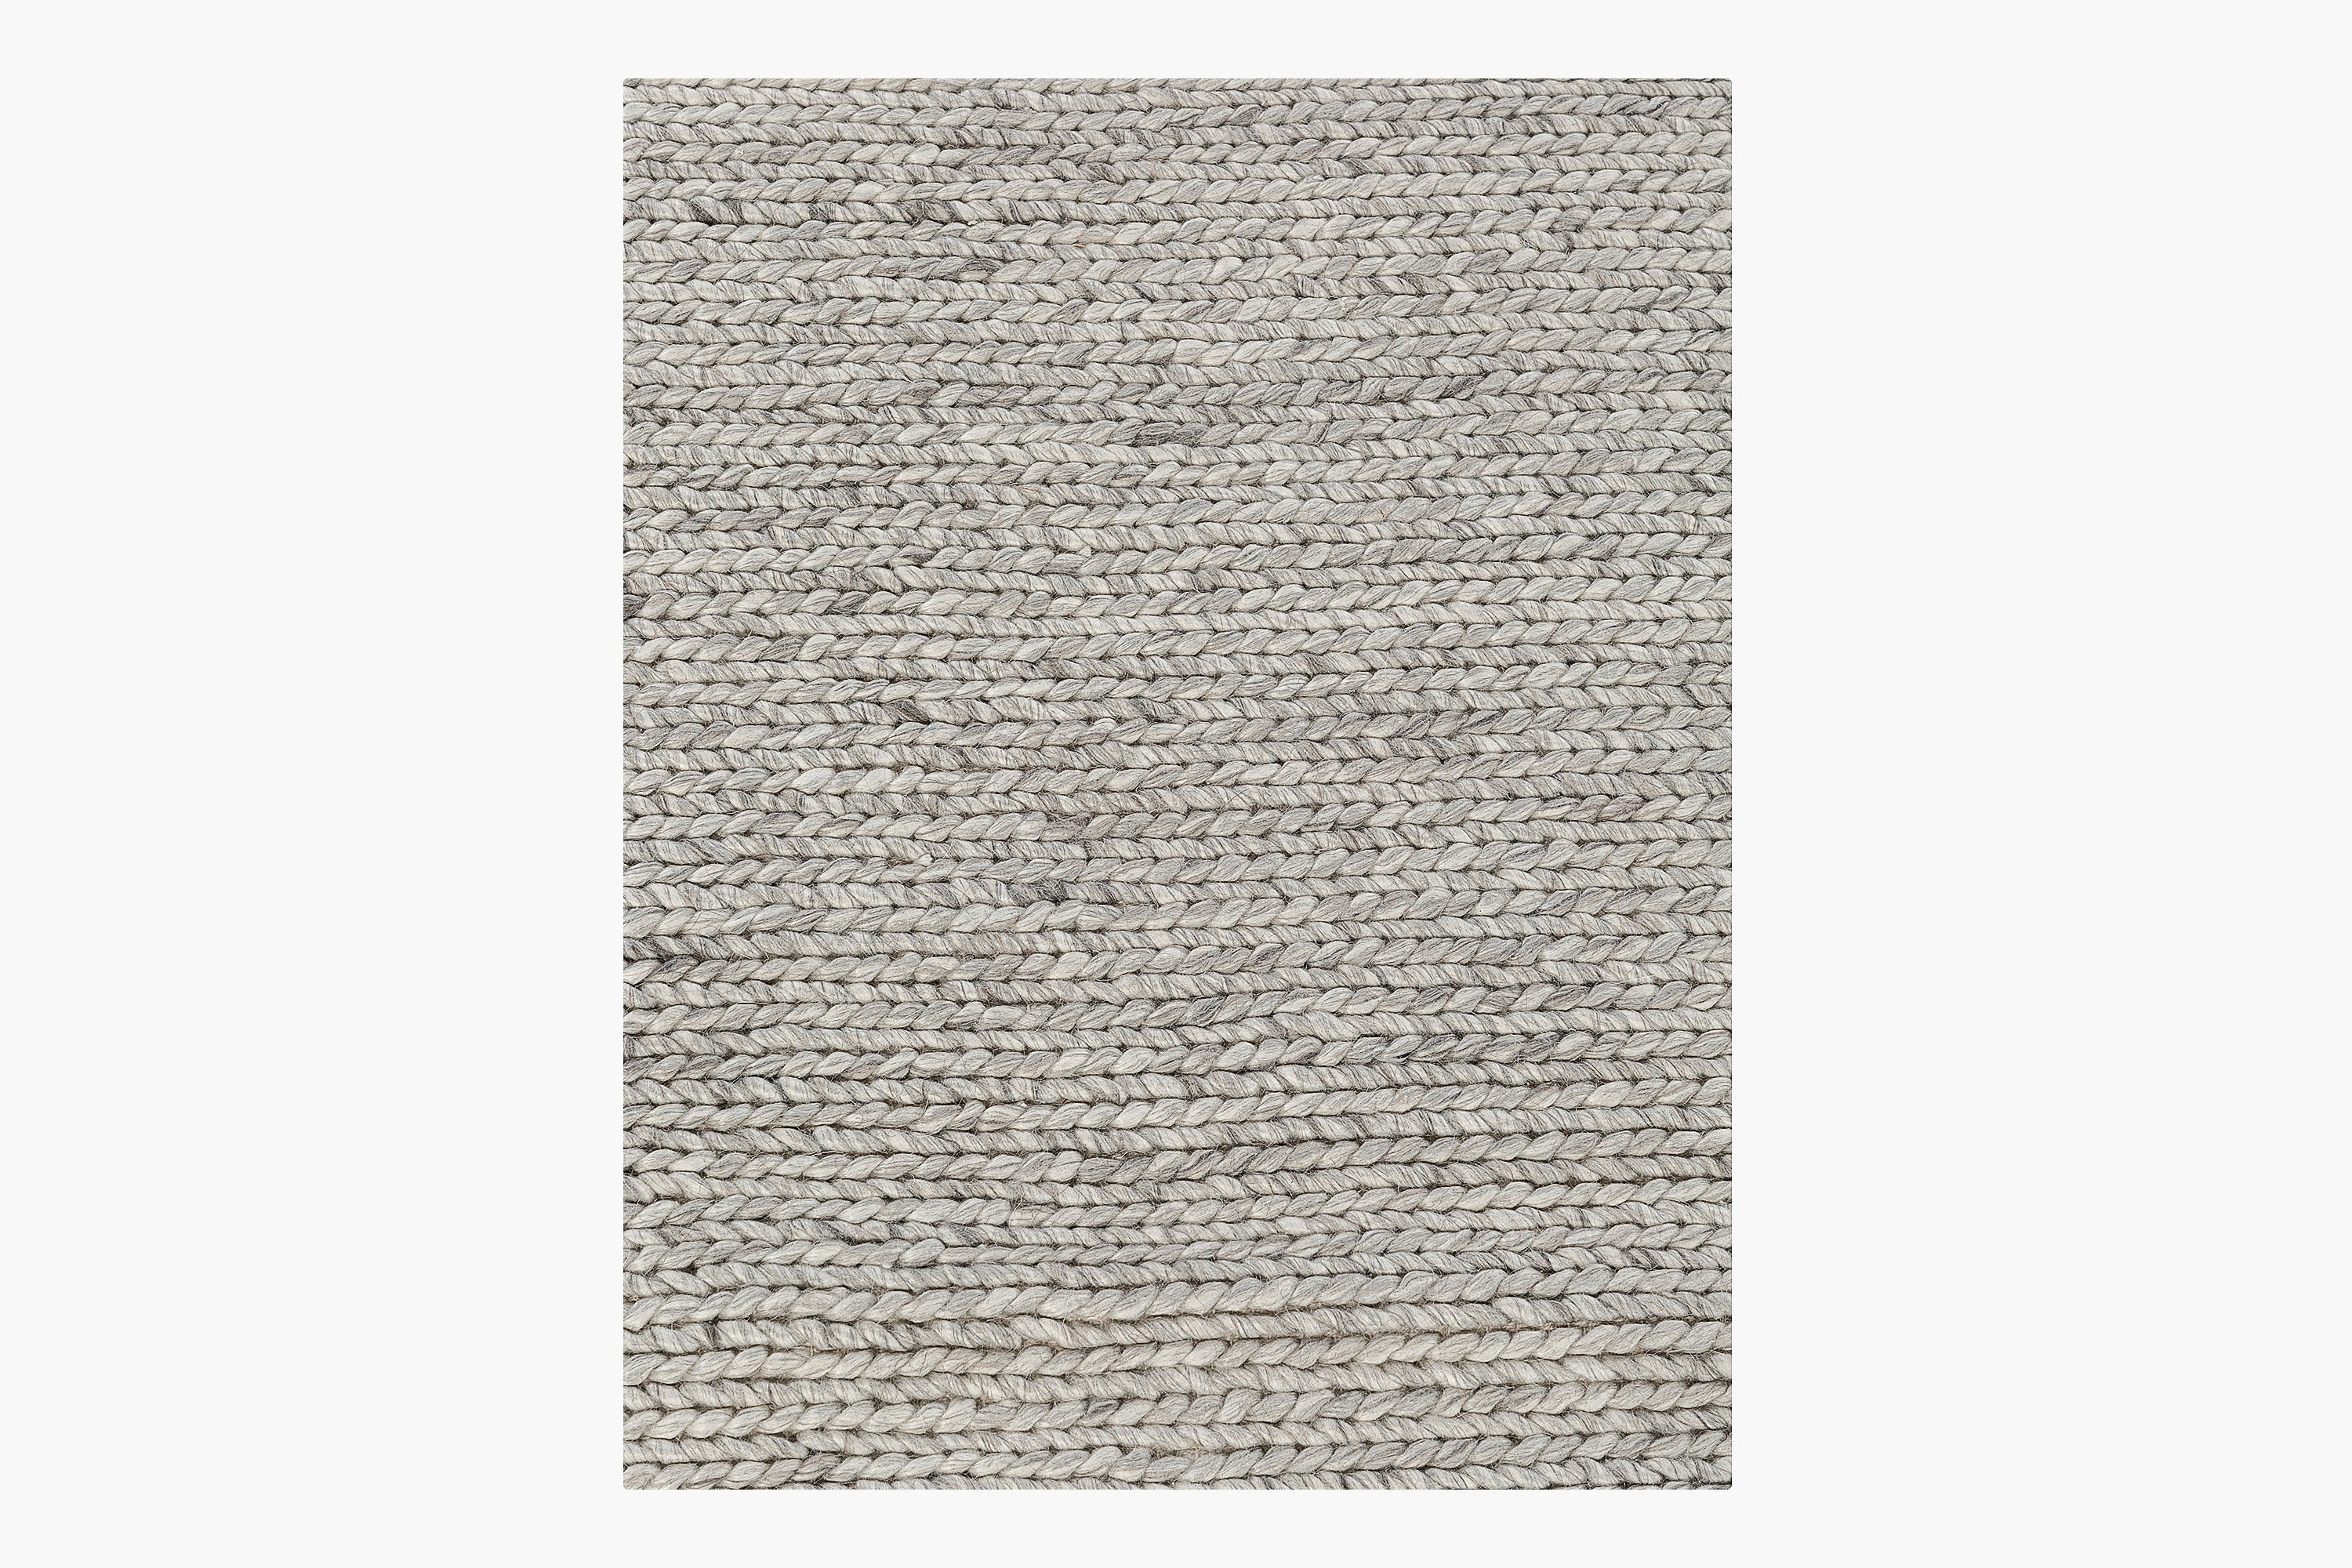 Hand Crafted Cable Knit Hand Woven Braided Wool Rug- Dark Grey by Hammers  And Heels